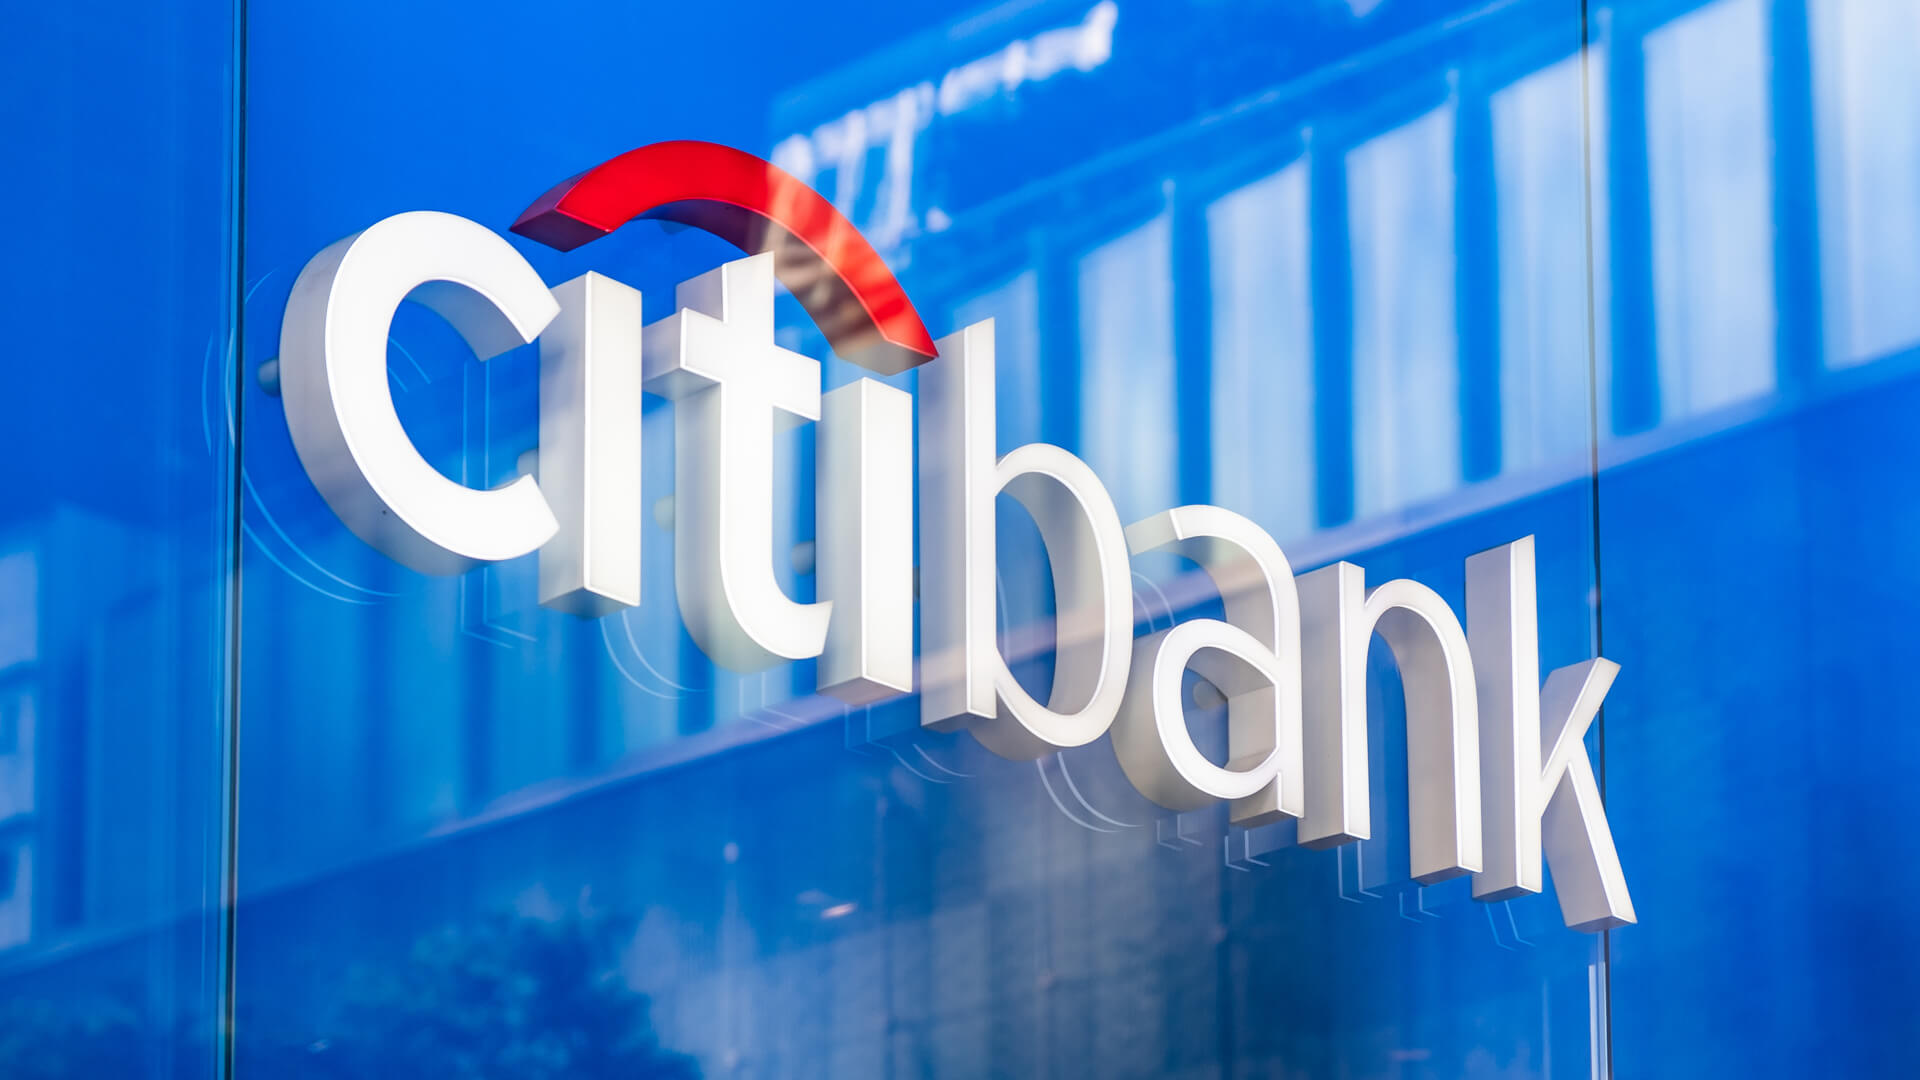 A Complete Review of Citibank – Going Digital